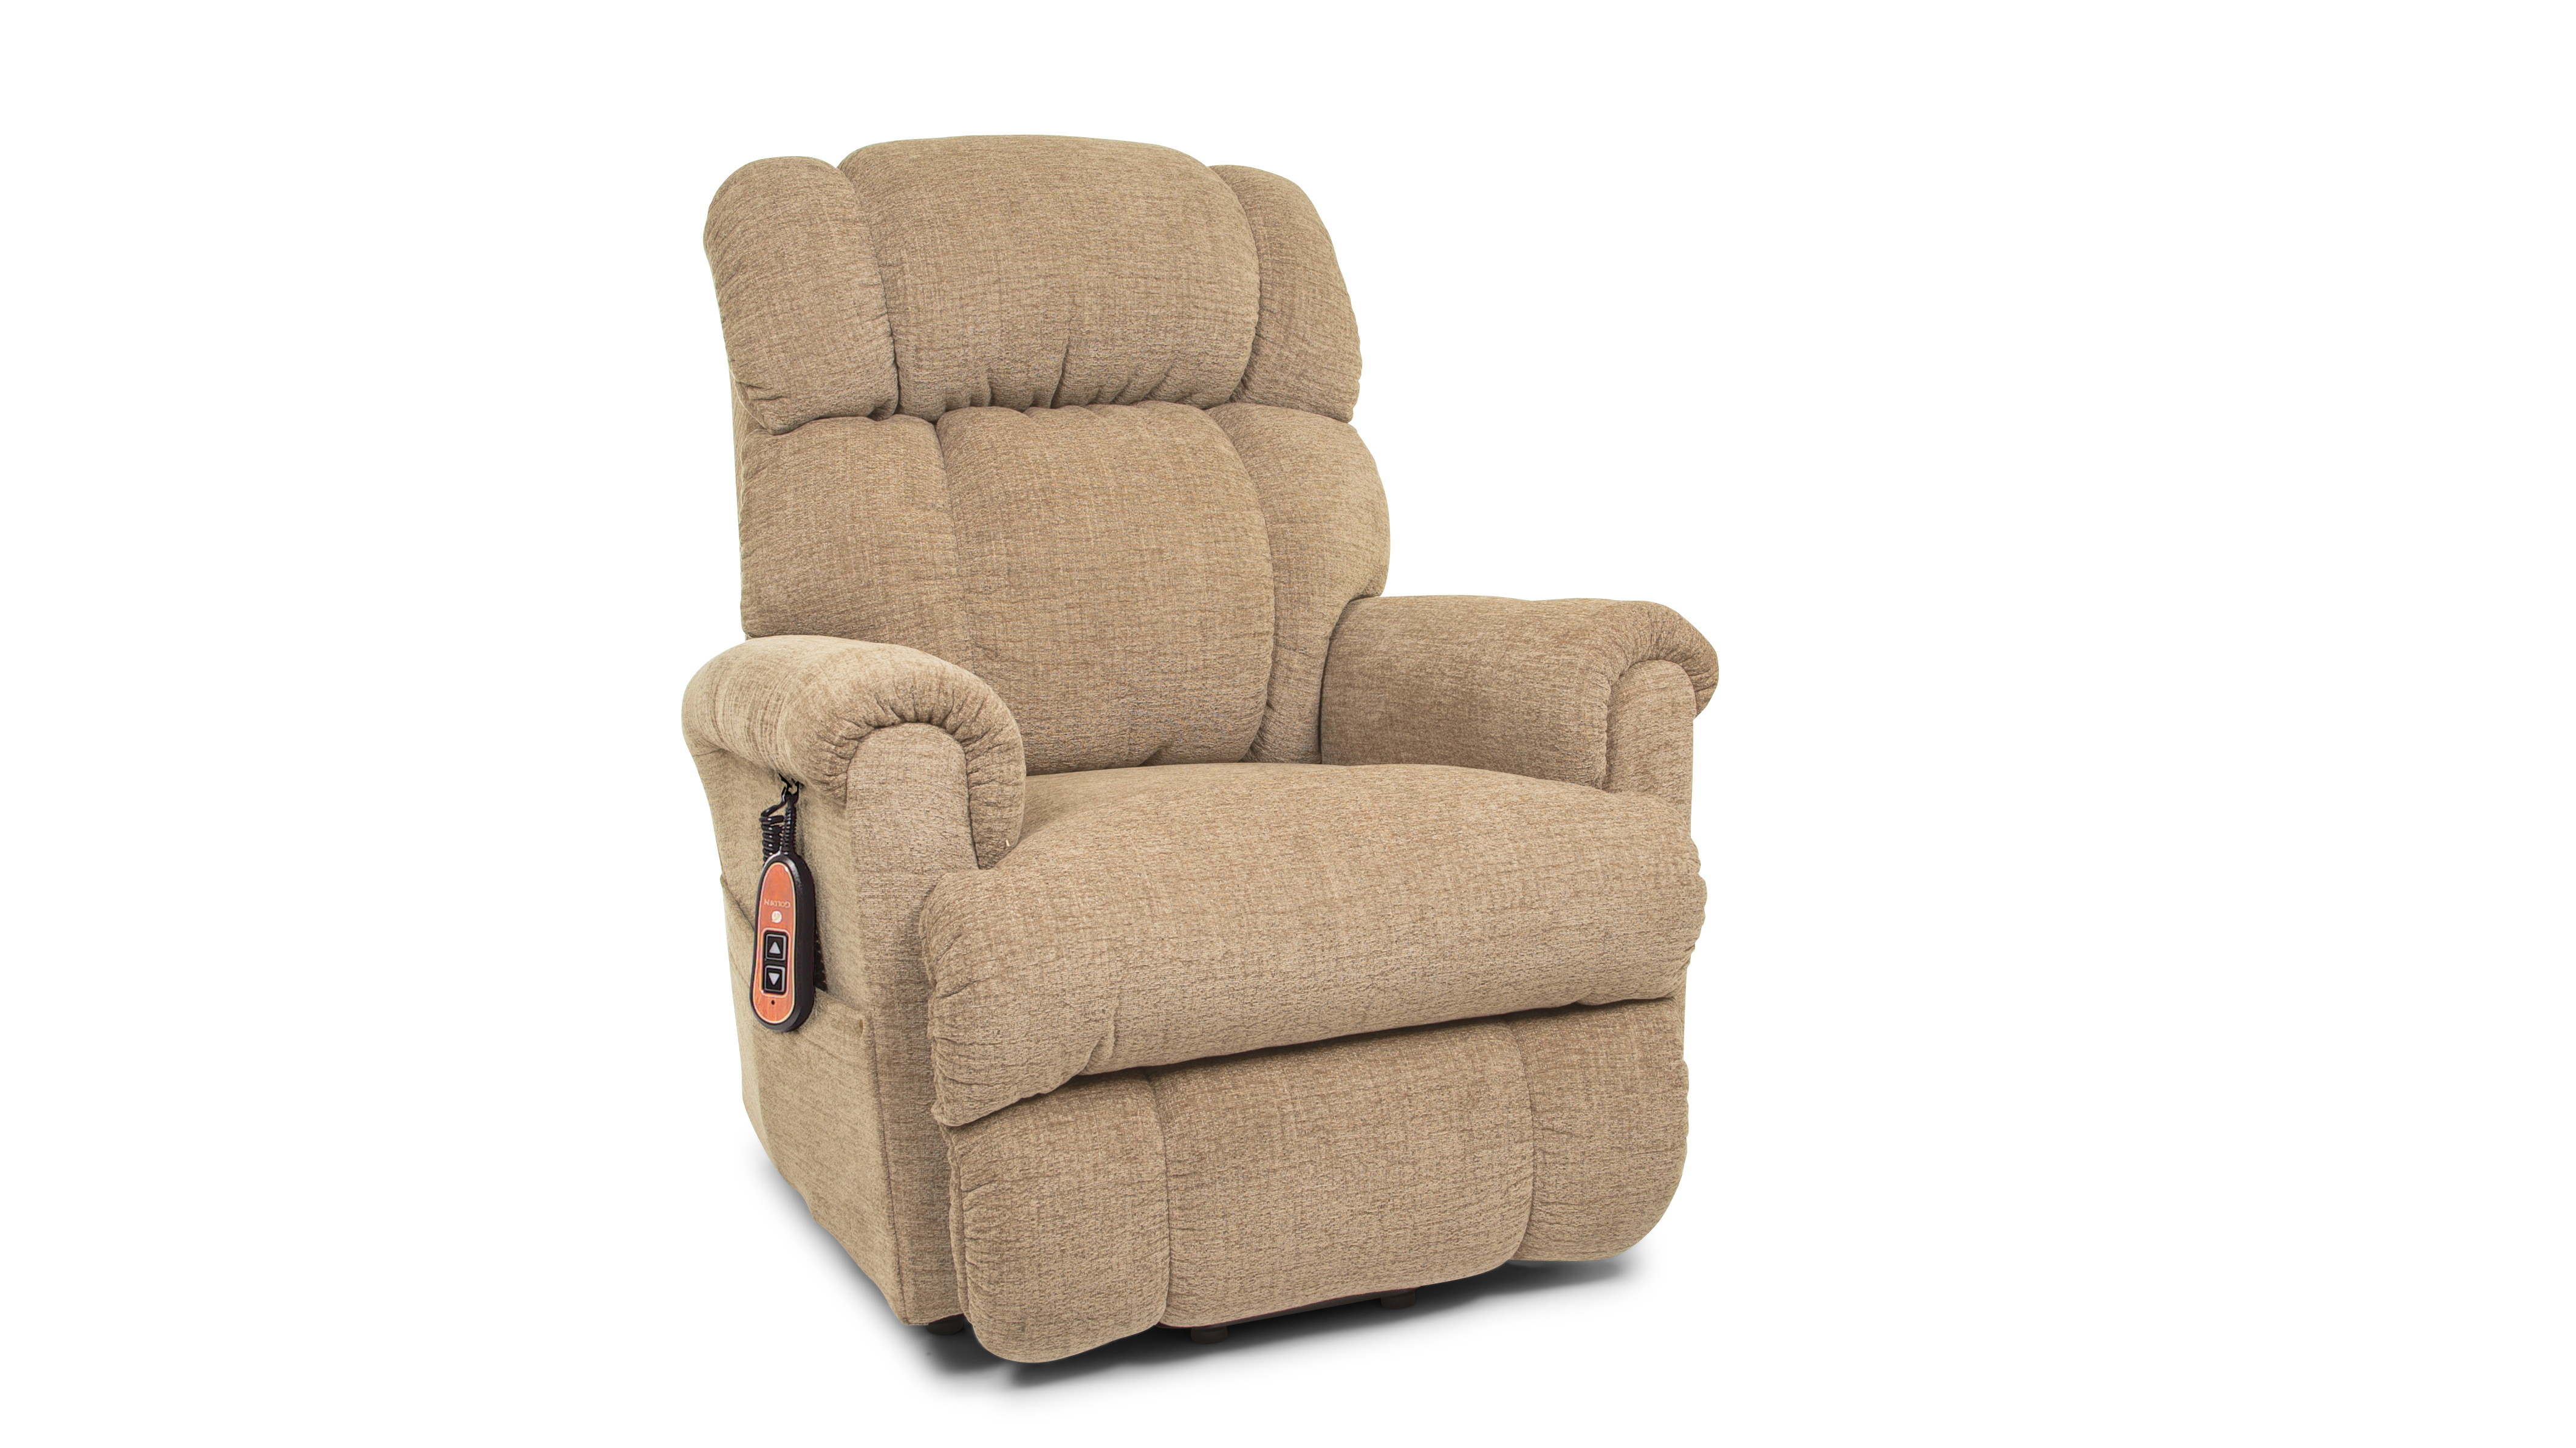 Photo of Golden Technologies Space Saver Lift Chair in Seated Position